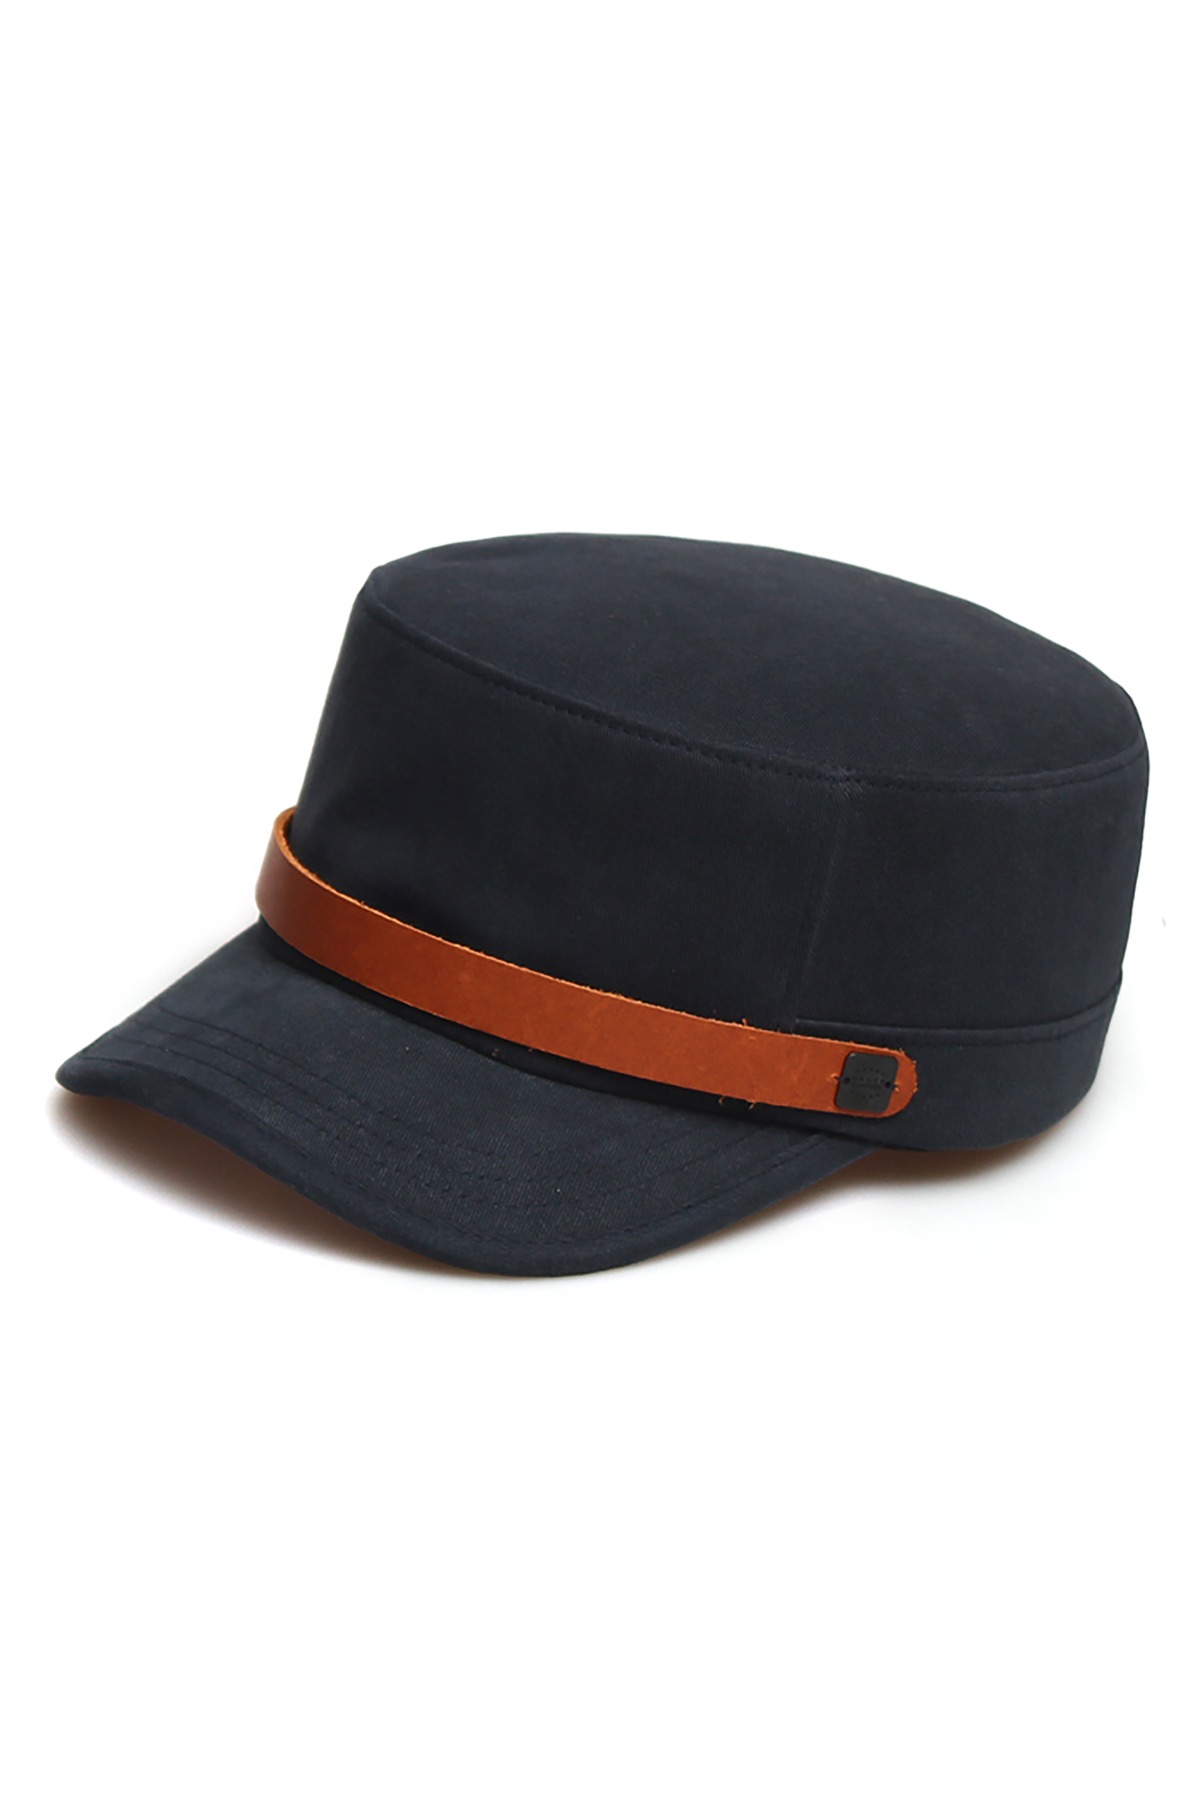 BELL BOY / LEATHER STRAP / SOLID NAVY